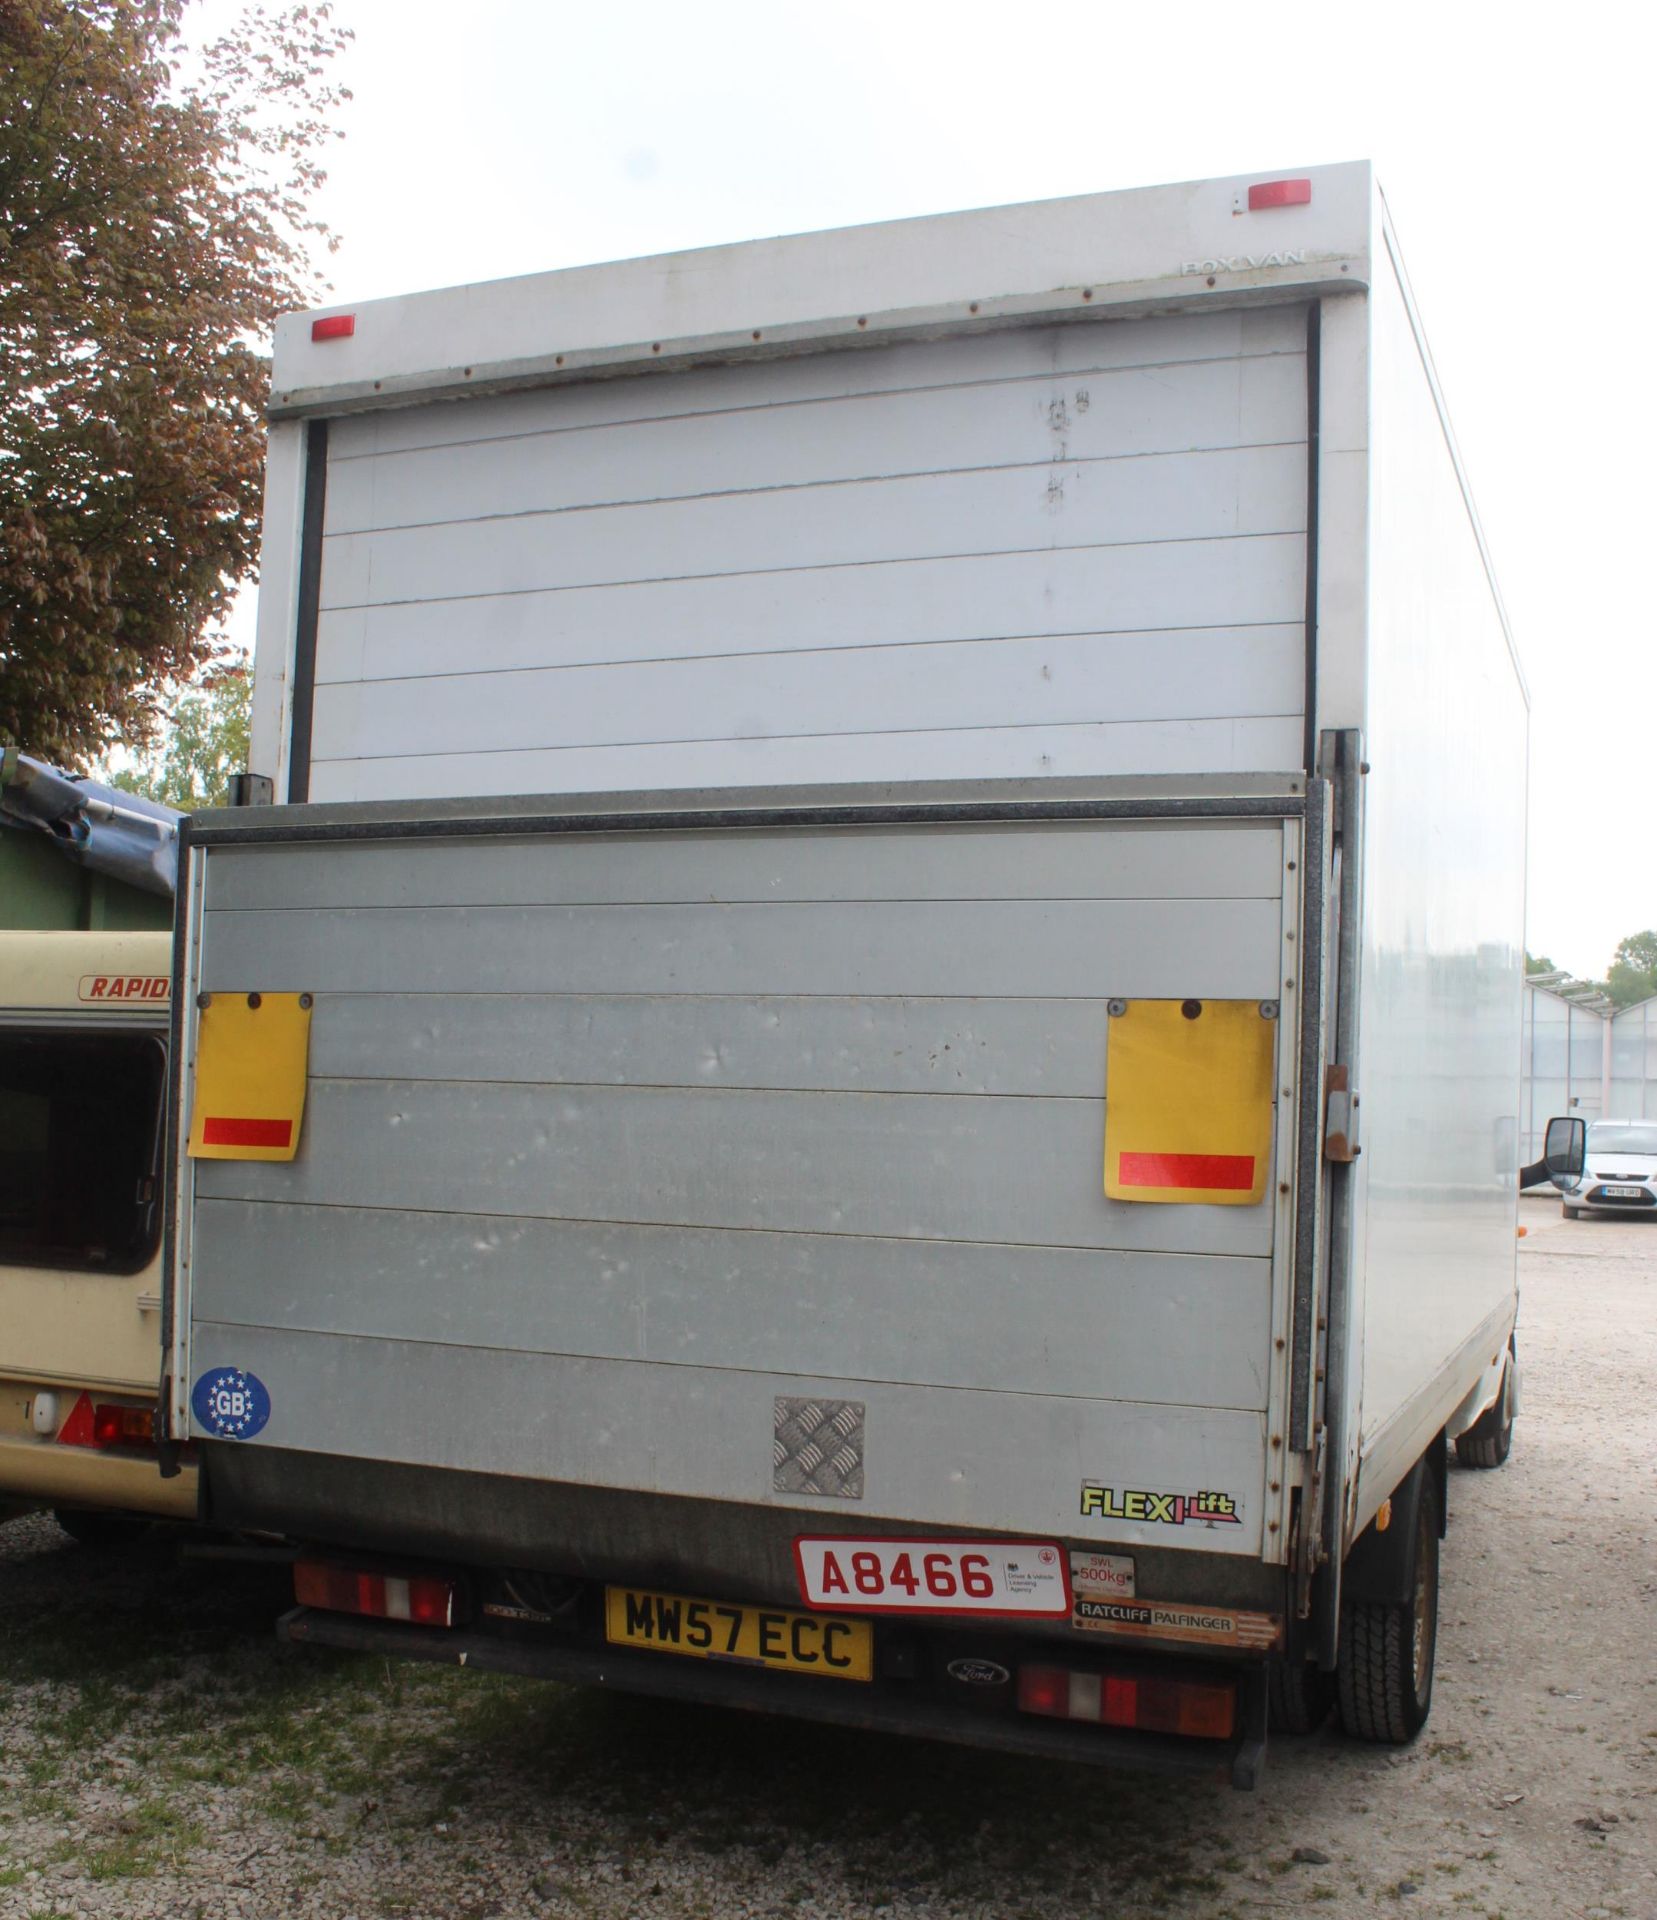 A 2008 WHITE FORD LUTON VAN WITH TAIL LIFT, REGISTRATION NUMBER MW57ECC, DIESEL ENGINE AND 129000 - Image 3 of 3